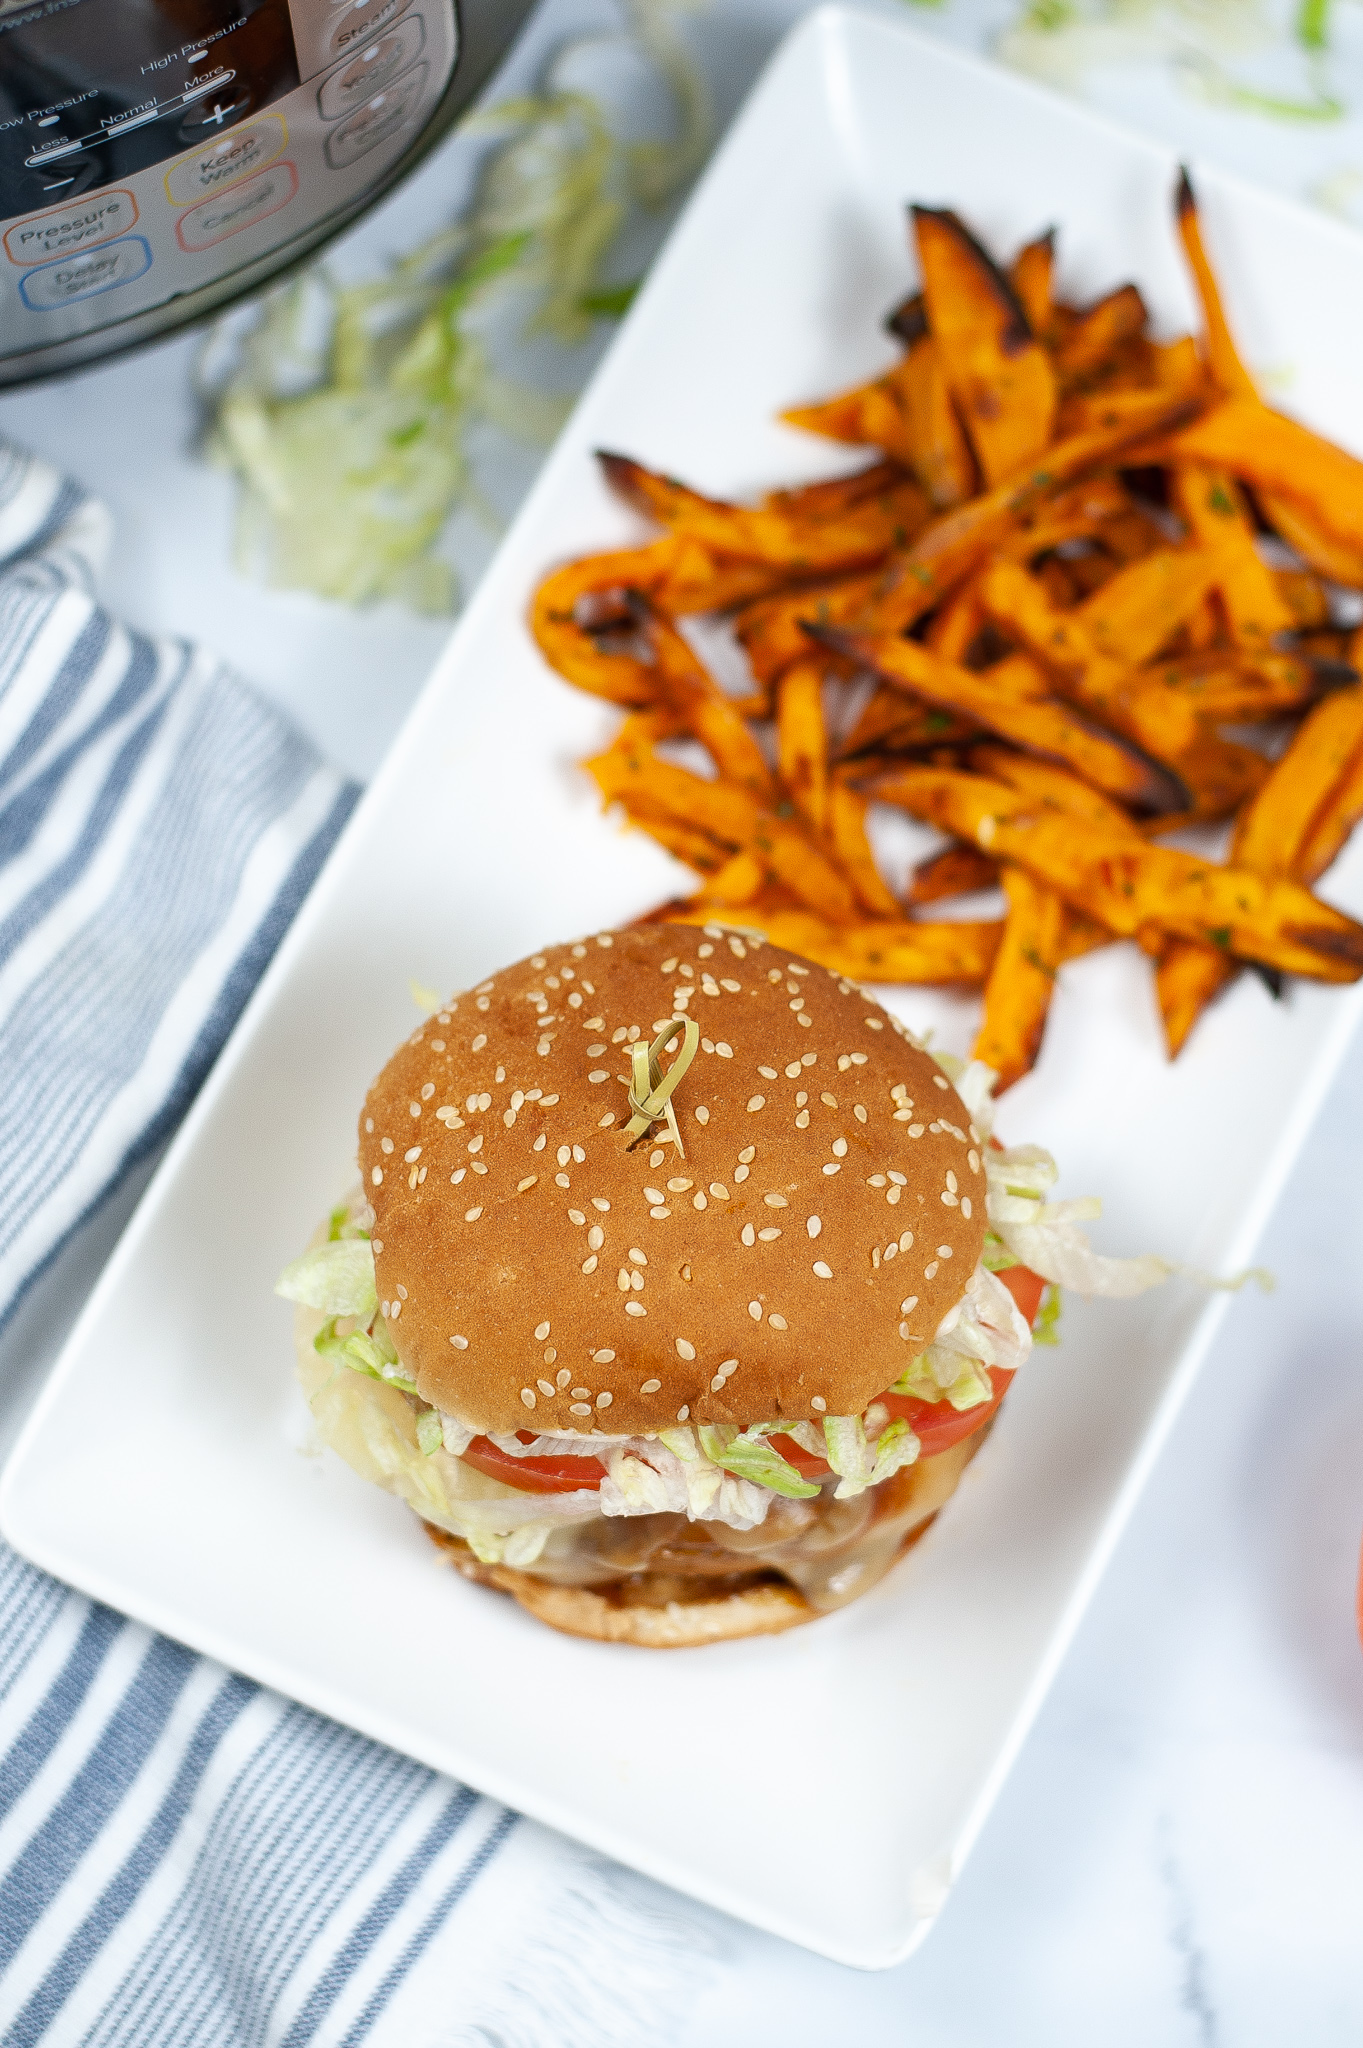 A square dish with the teriyaki chicken sandwich with a side of sweet potato fries.